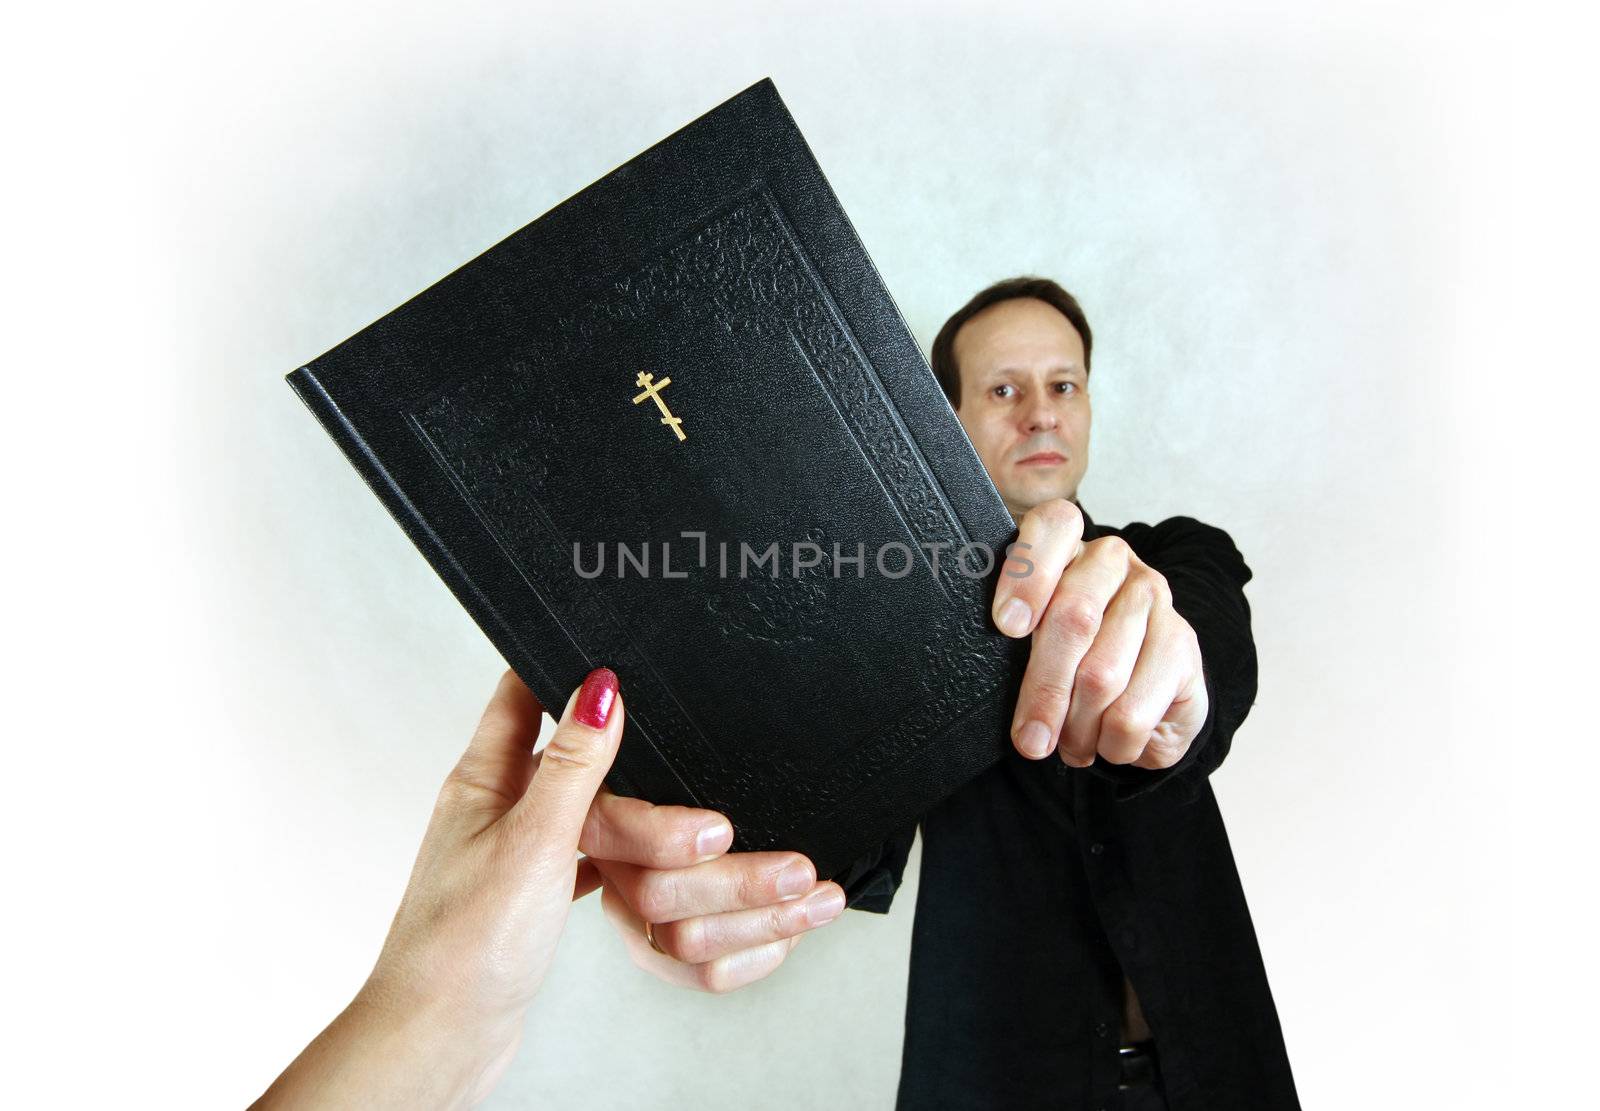 The man transfers the woman the bible